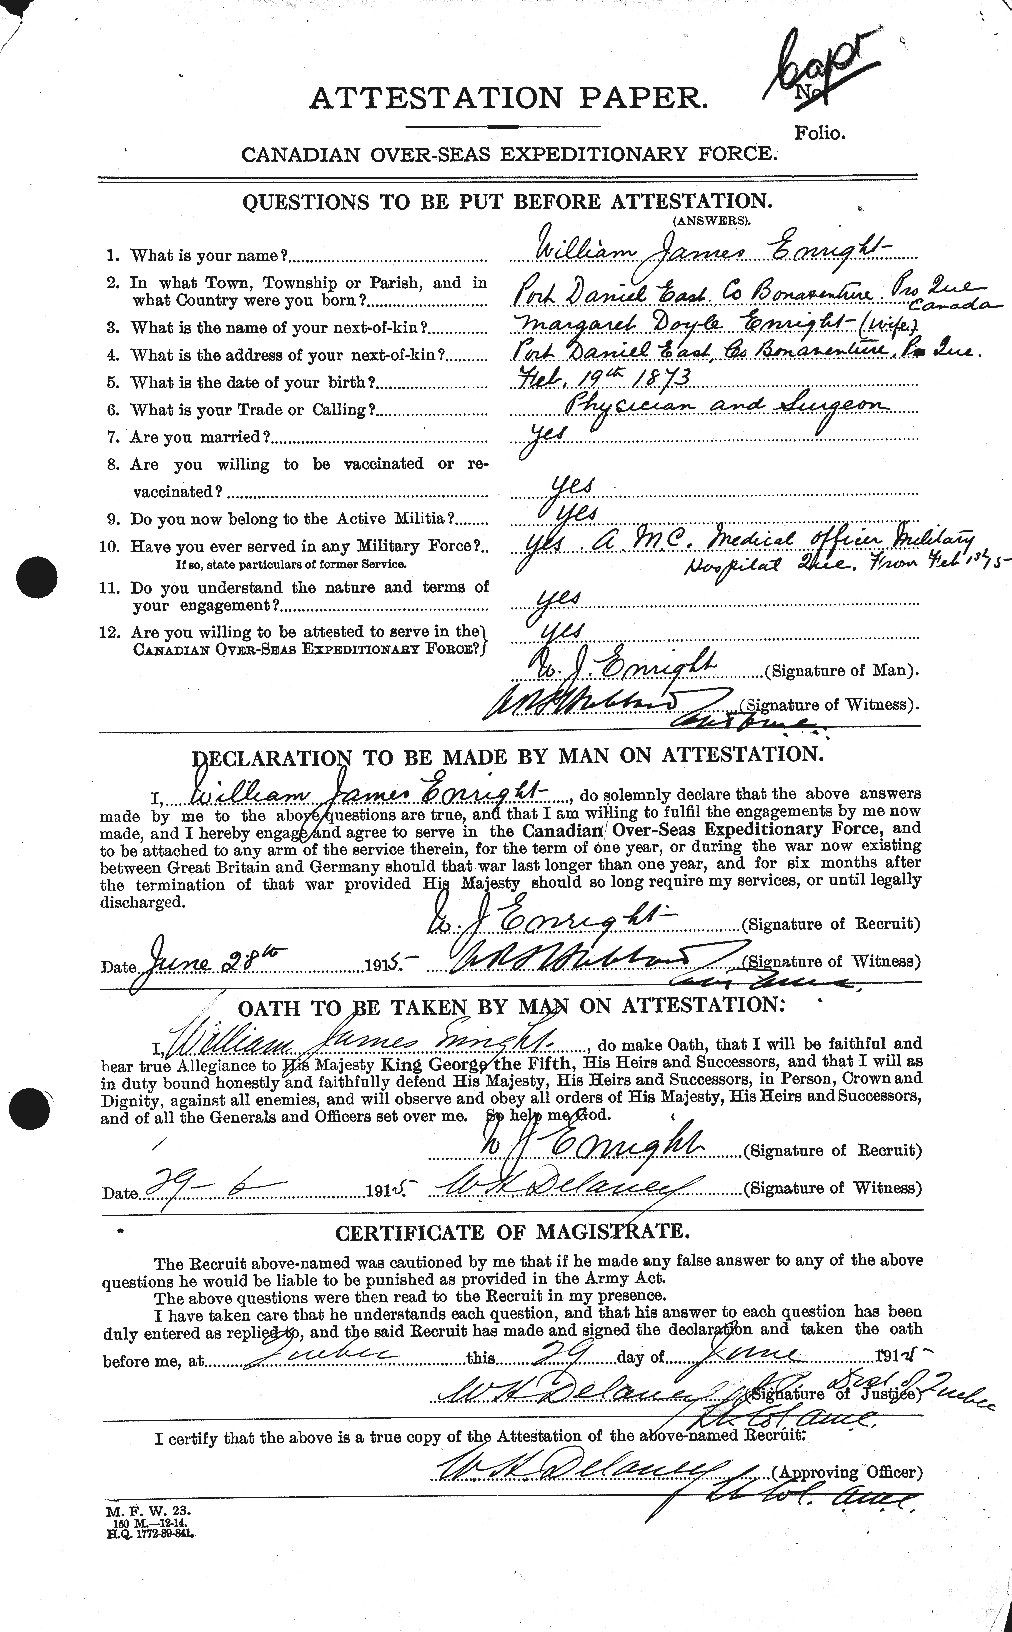 Personnel Records of the First World War - CEF 312023a